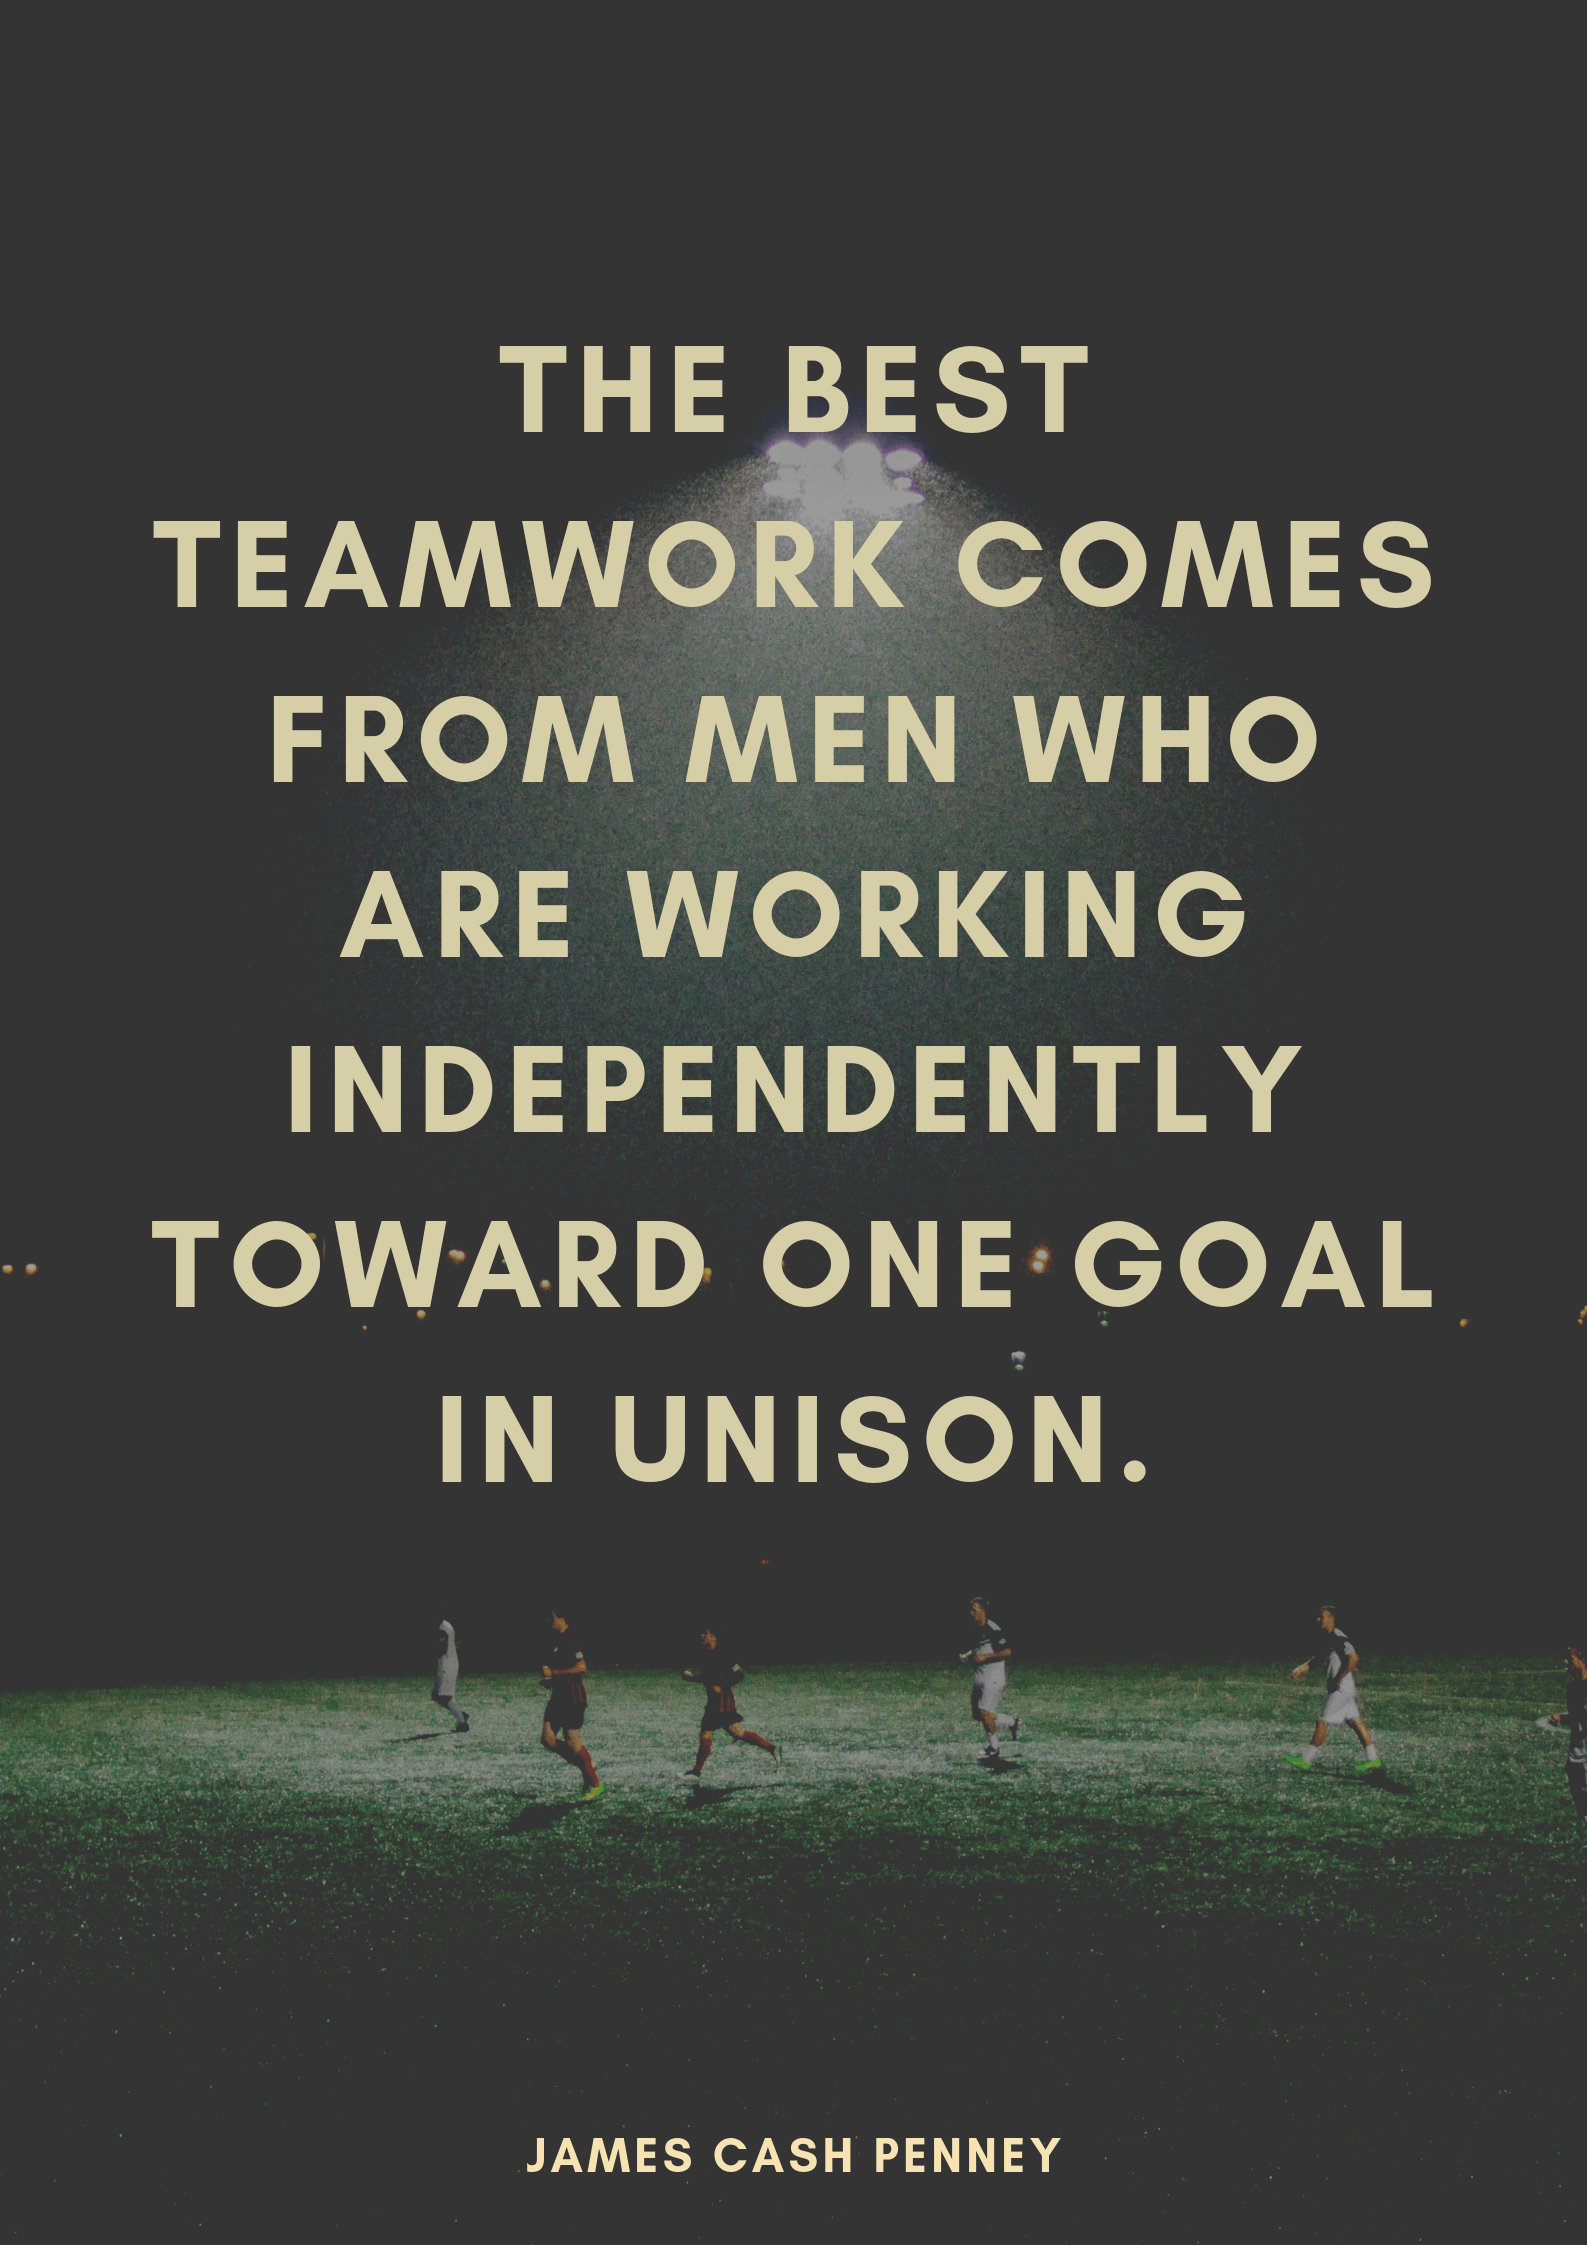 the best teamwork comes from men who are working independently toward one goal in unison. james cash penney